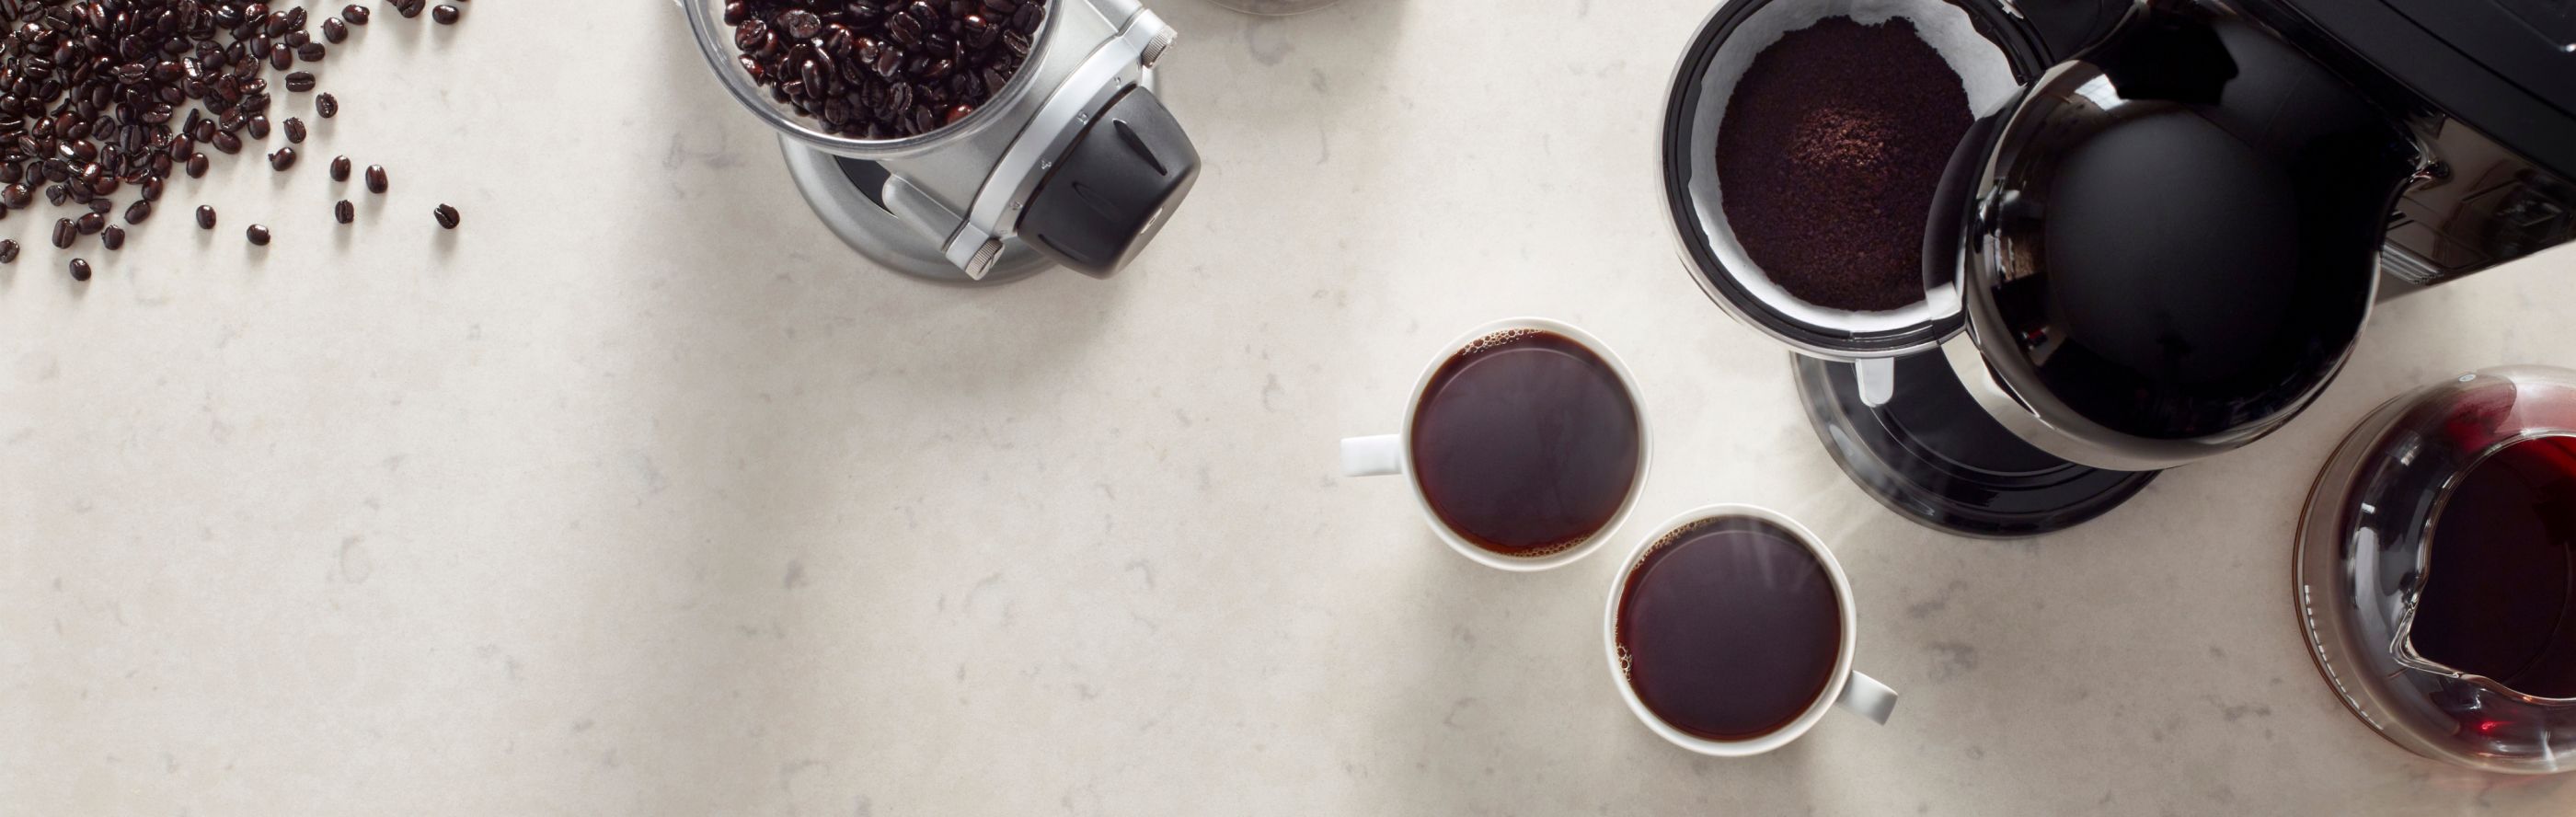 Bird’s-eye view of full cups of coffee, a coffee maker and a coffee grinder near coffee beans